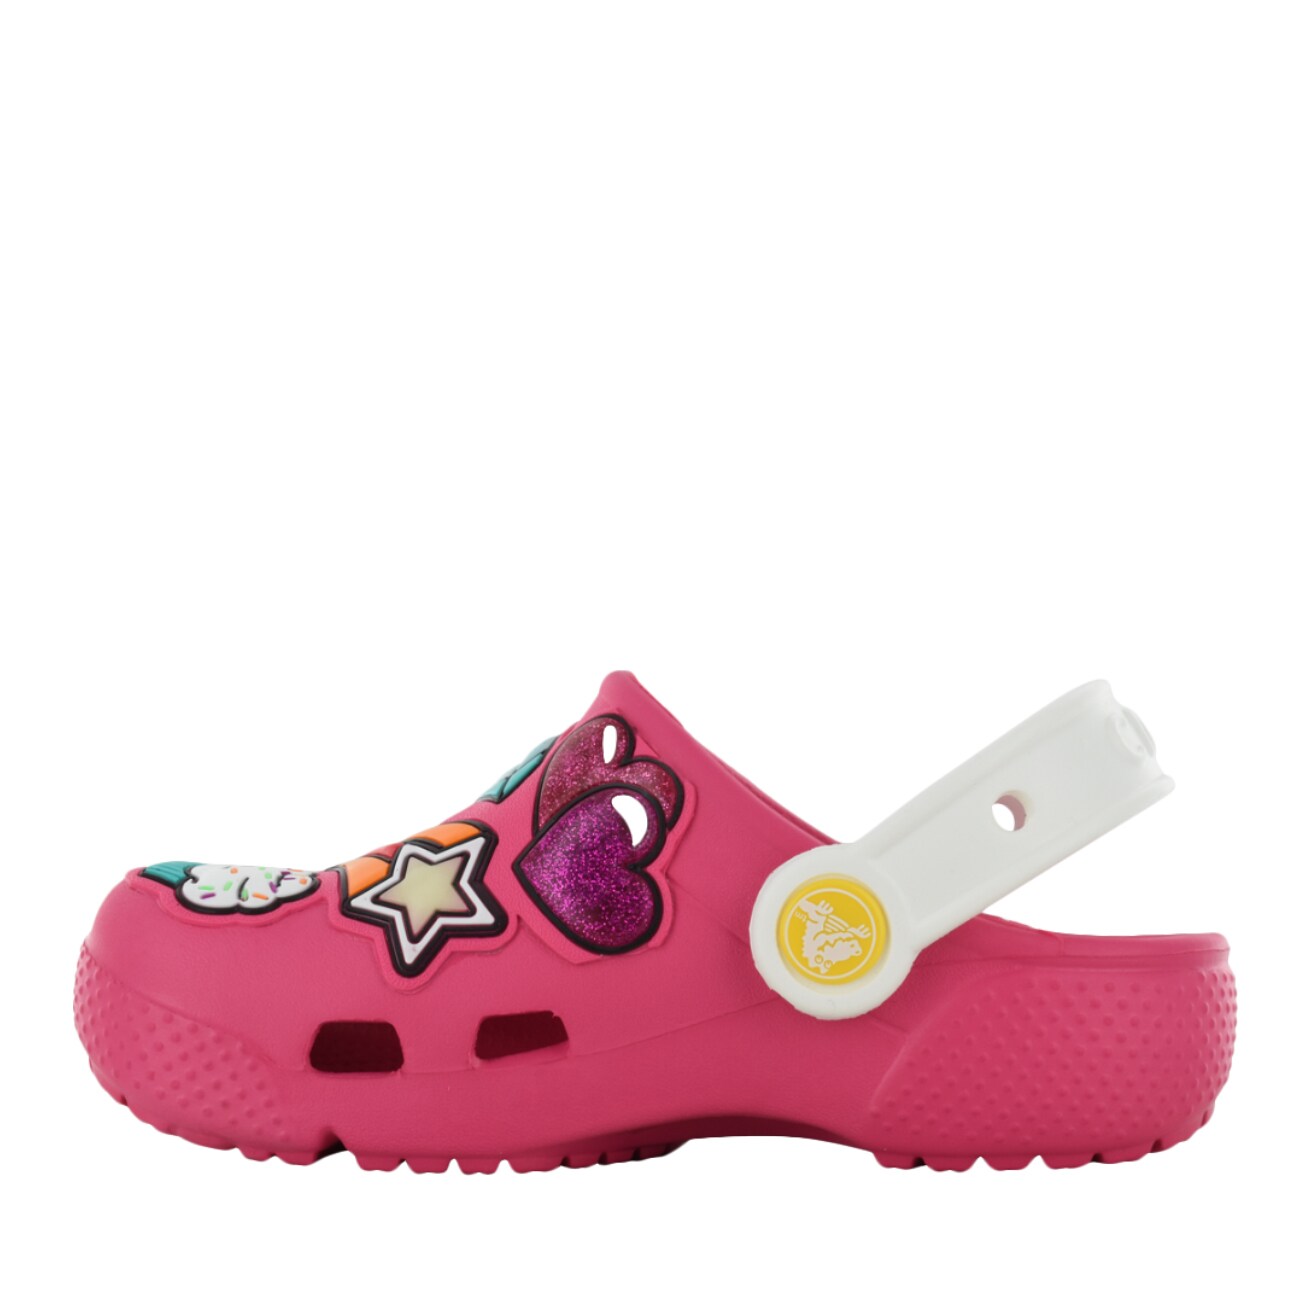 Crocs Toddler Girl's Fun Lab Playful Patches Sandal | The Shoe Company